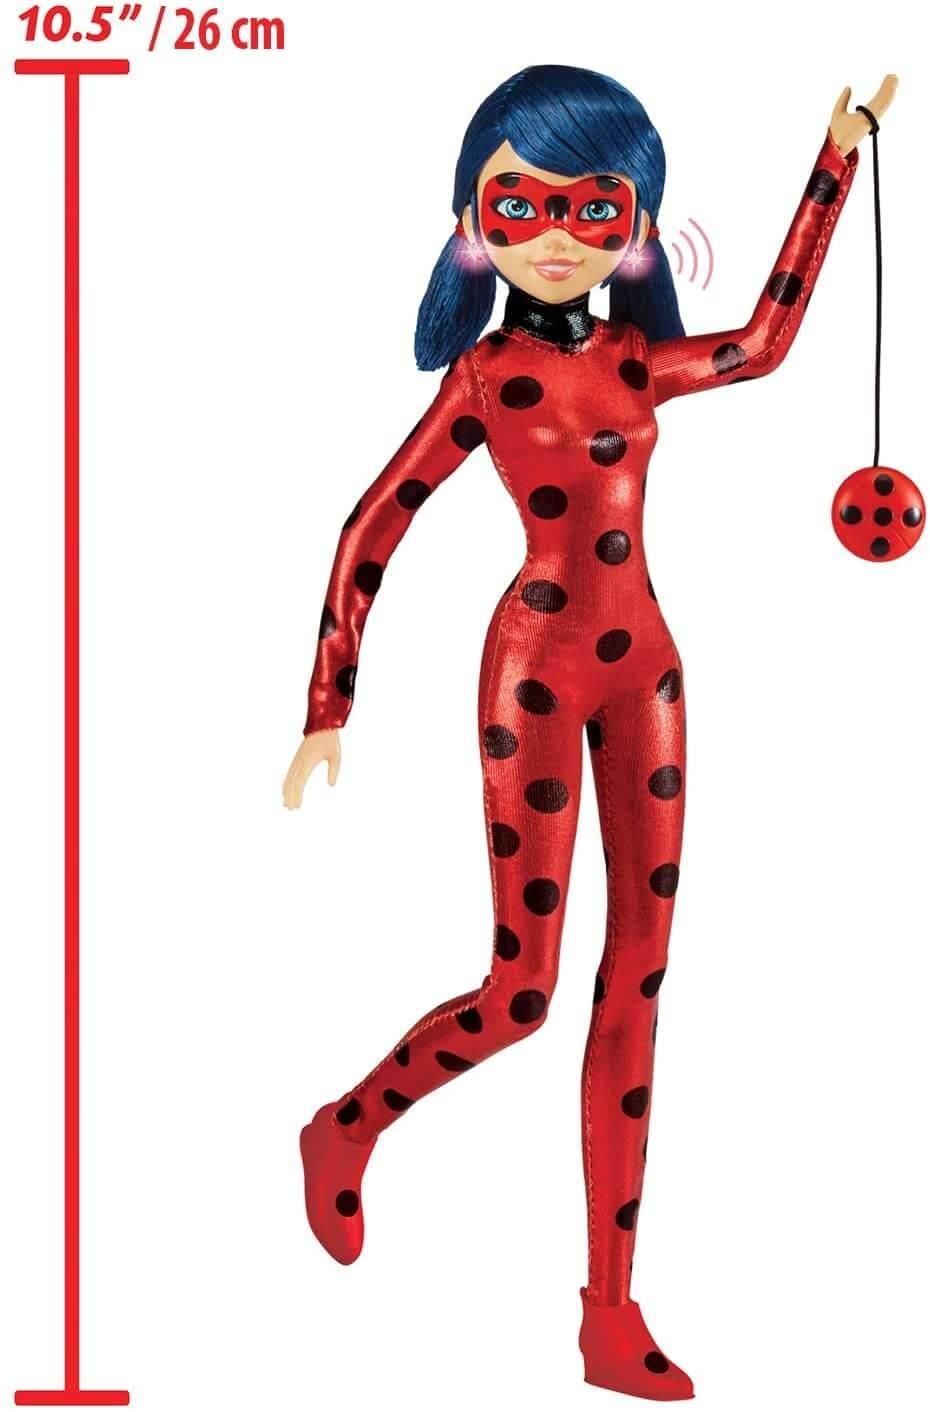 Buy Miraculous Talk & Sparkle Ladybug Doll at BargainMax | Free Delivery  over £ and Buy Now, Pay Later with Klarna, ClearPay & Laybuy | Bargain  Max